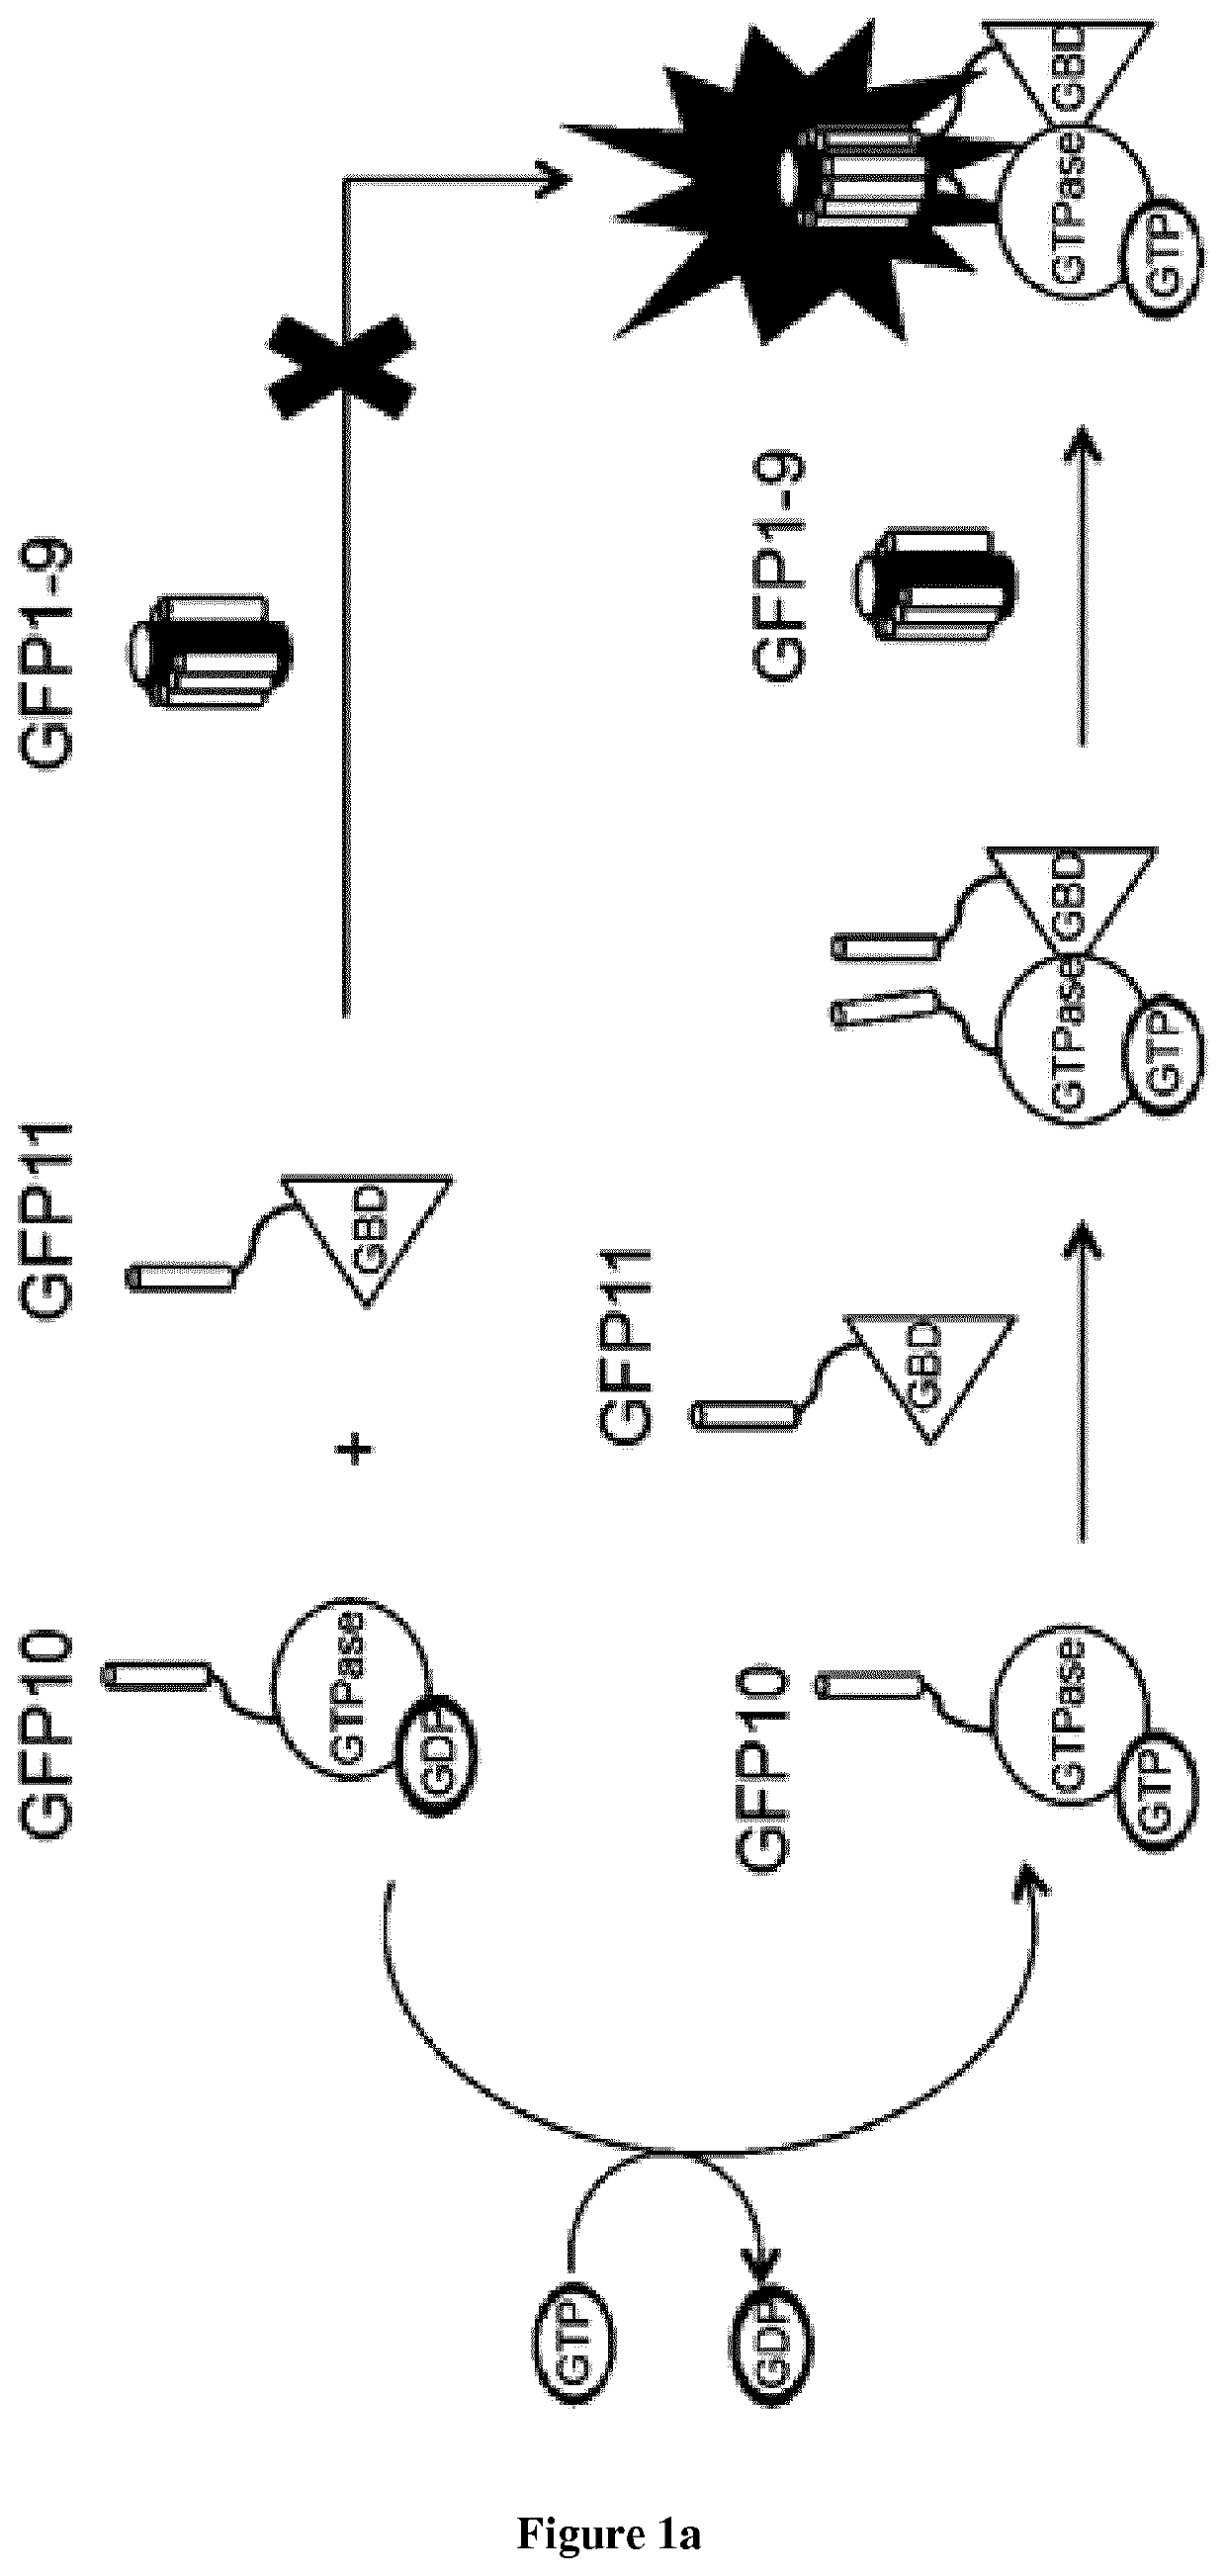 Methods for detecting protein-protein interactions